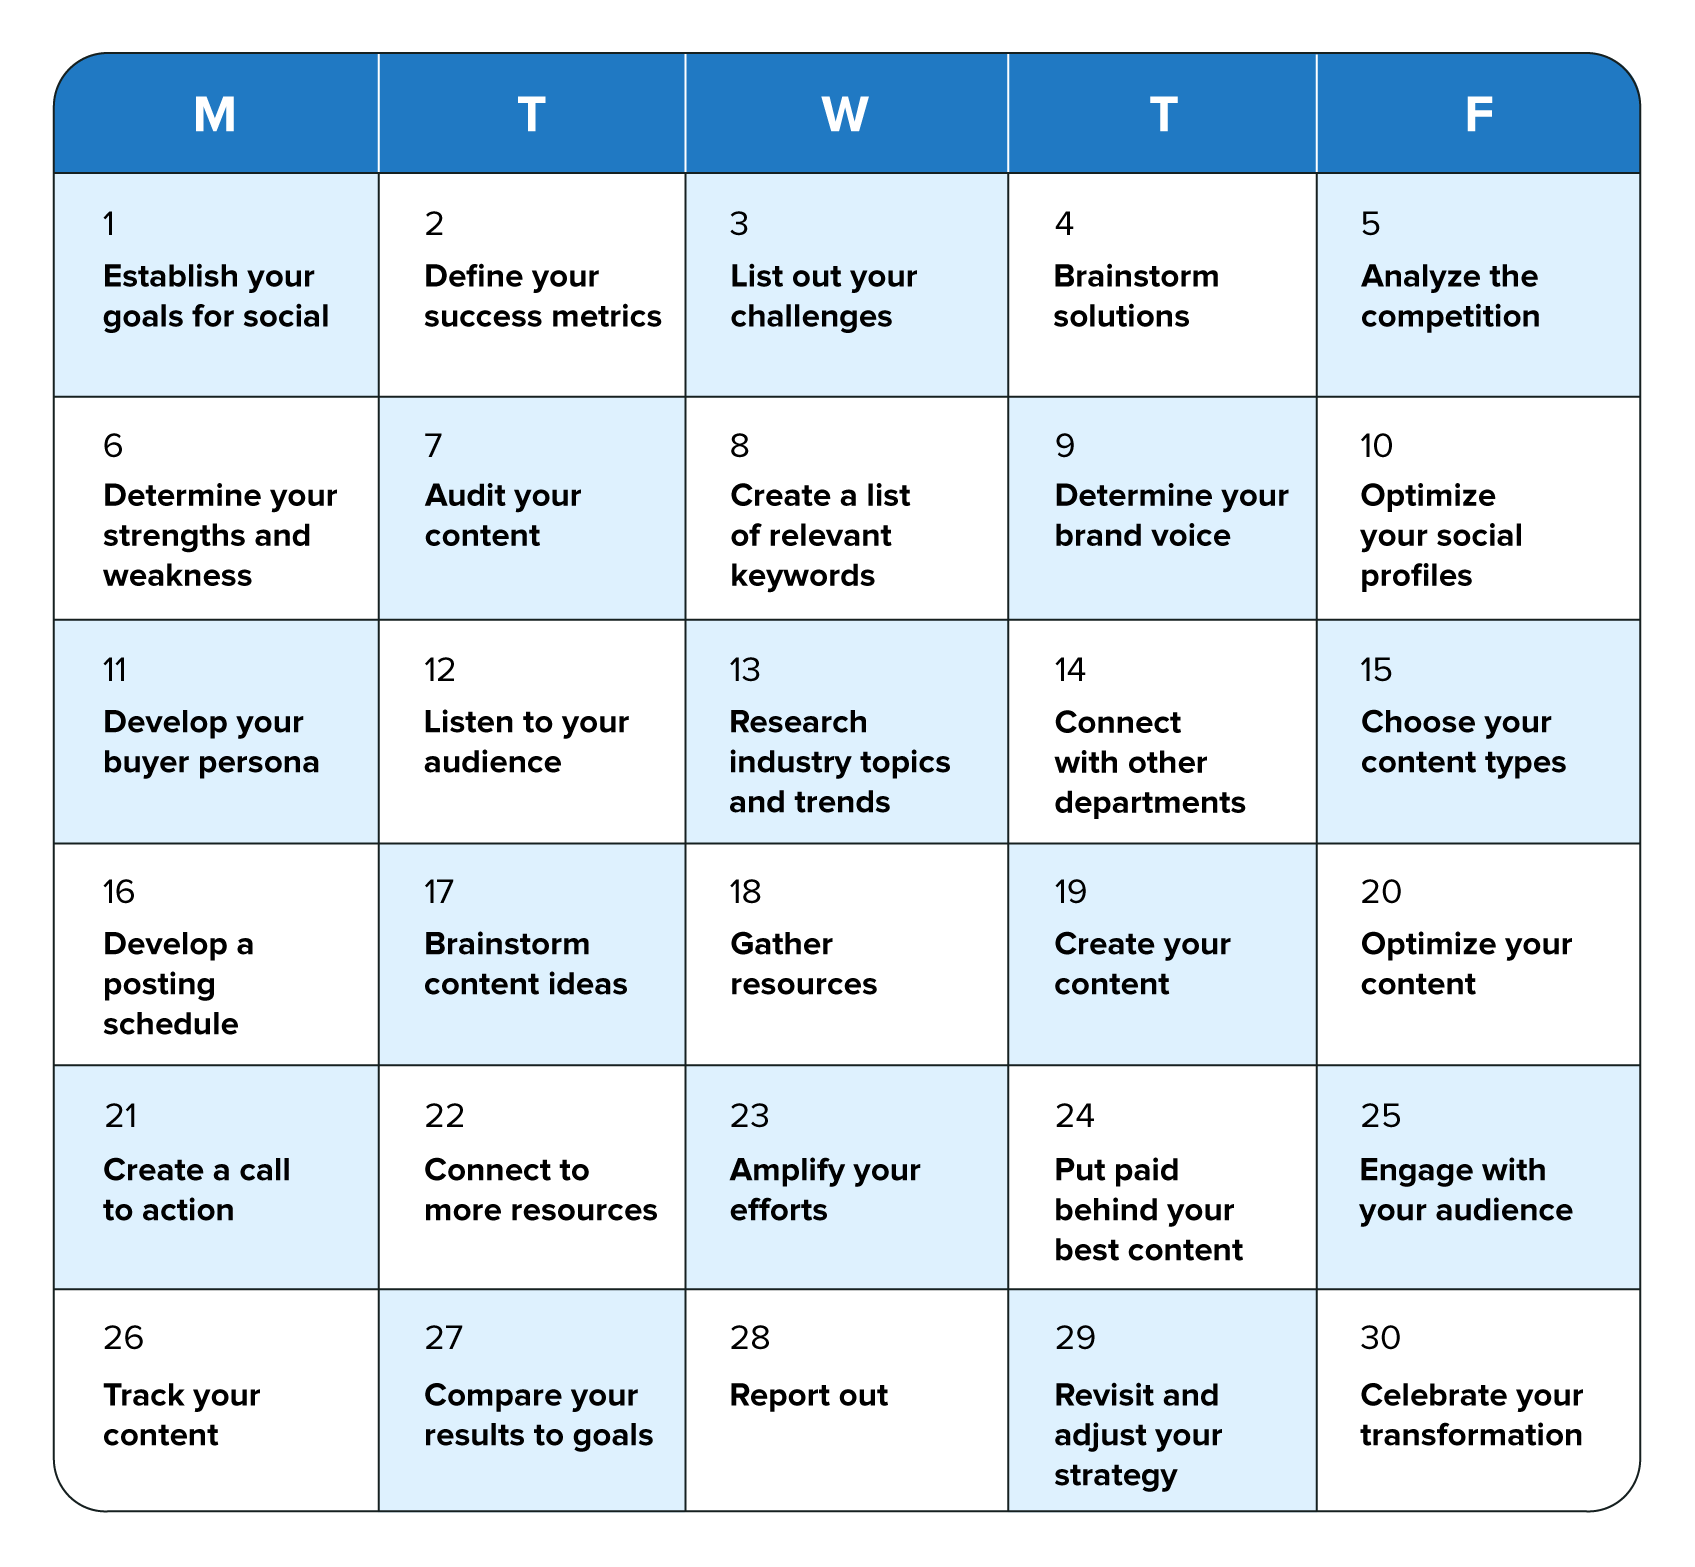 An at-a-glance calendar showing each step of the 30-day social media plan.